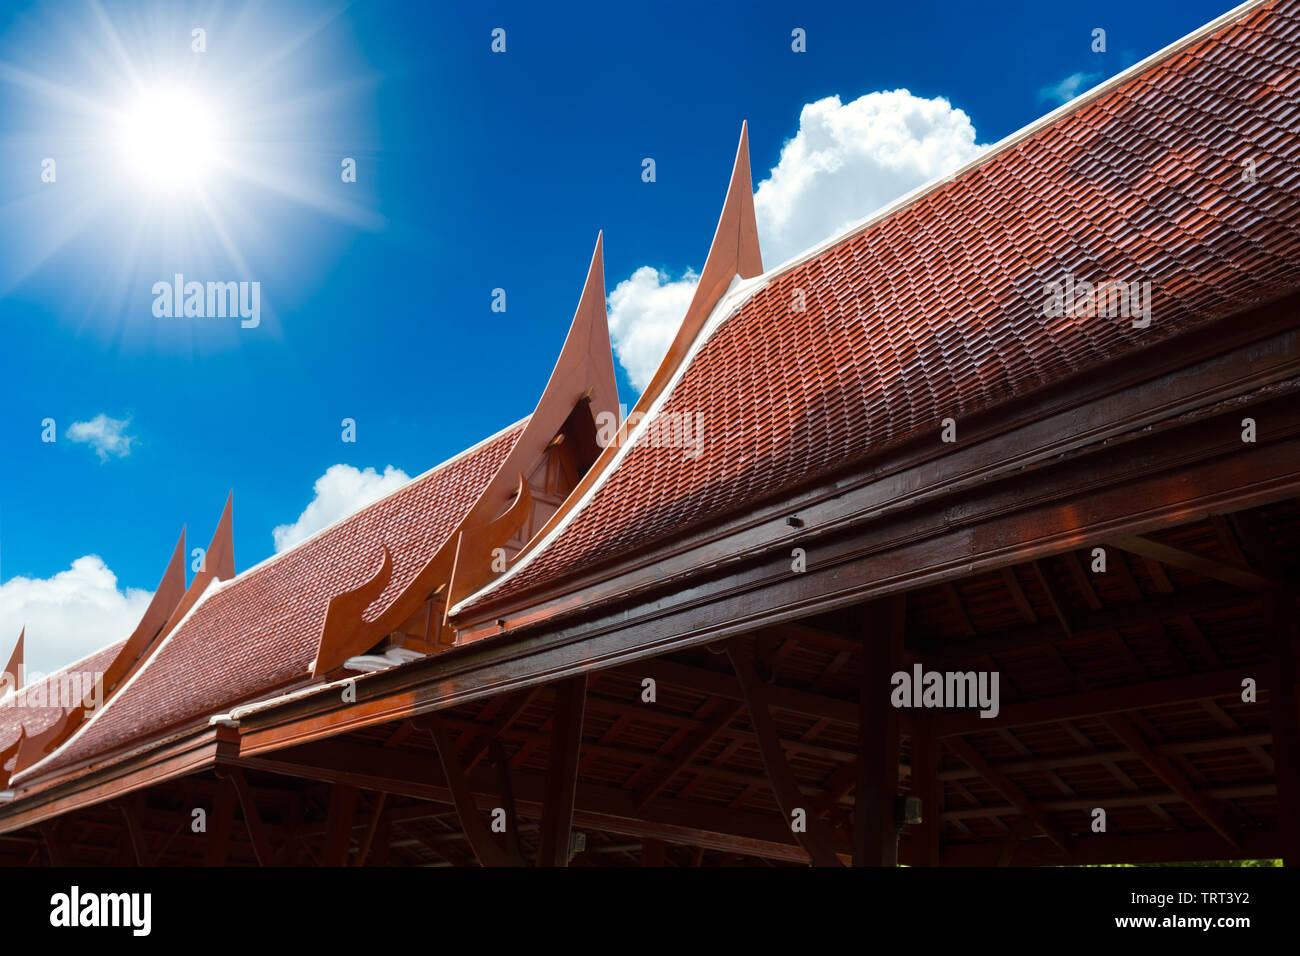 Thai home architecture style of traditional house roof sharp top tip Stock Photo